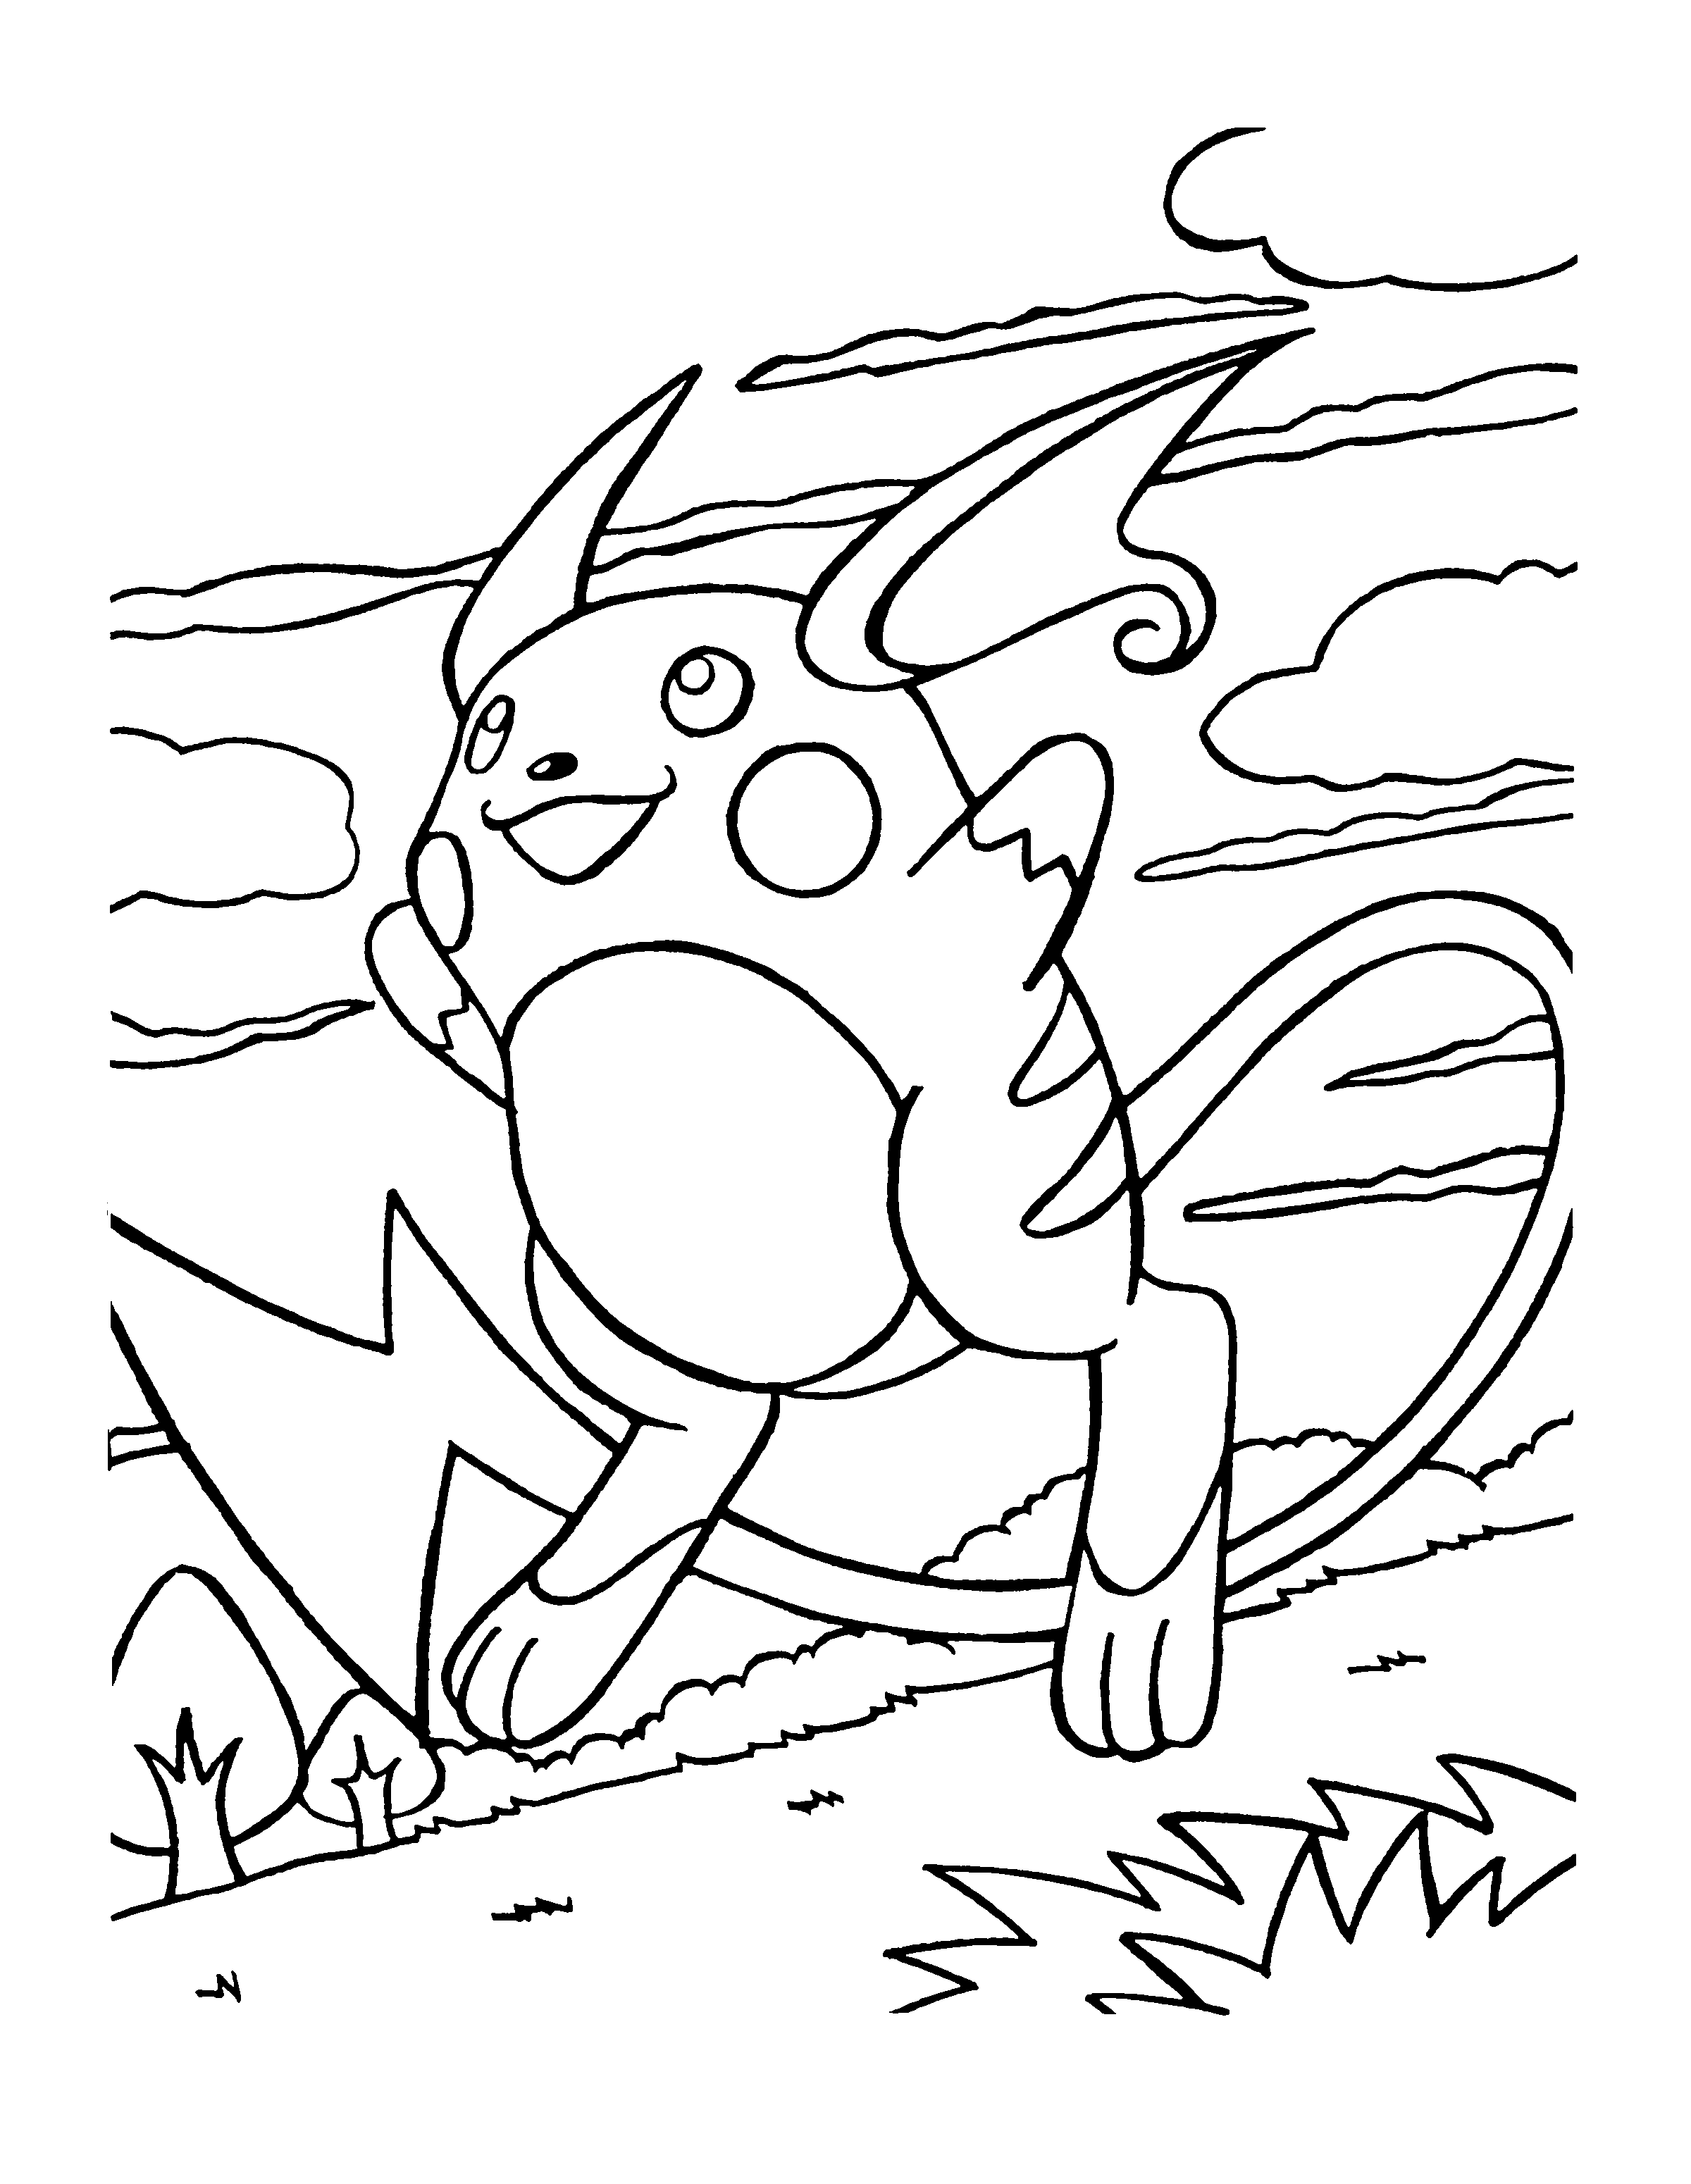 animated-coloring-pages-pokemon-image-0630